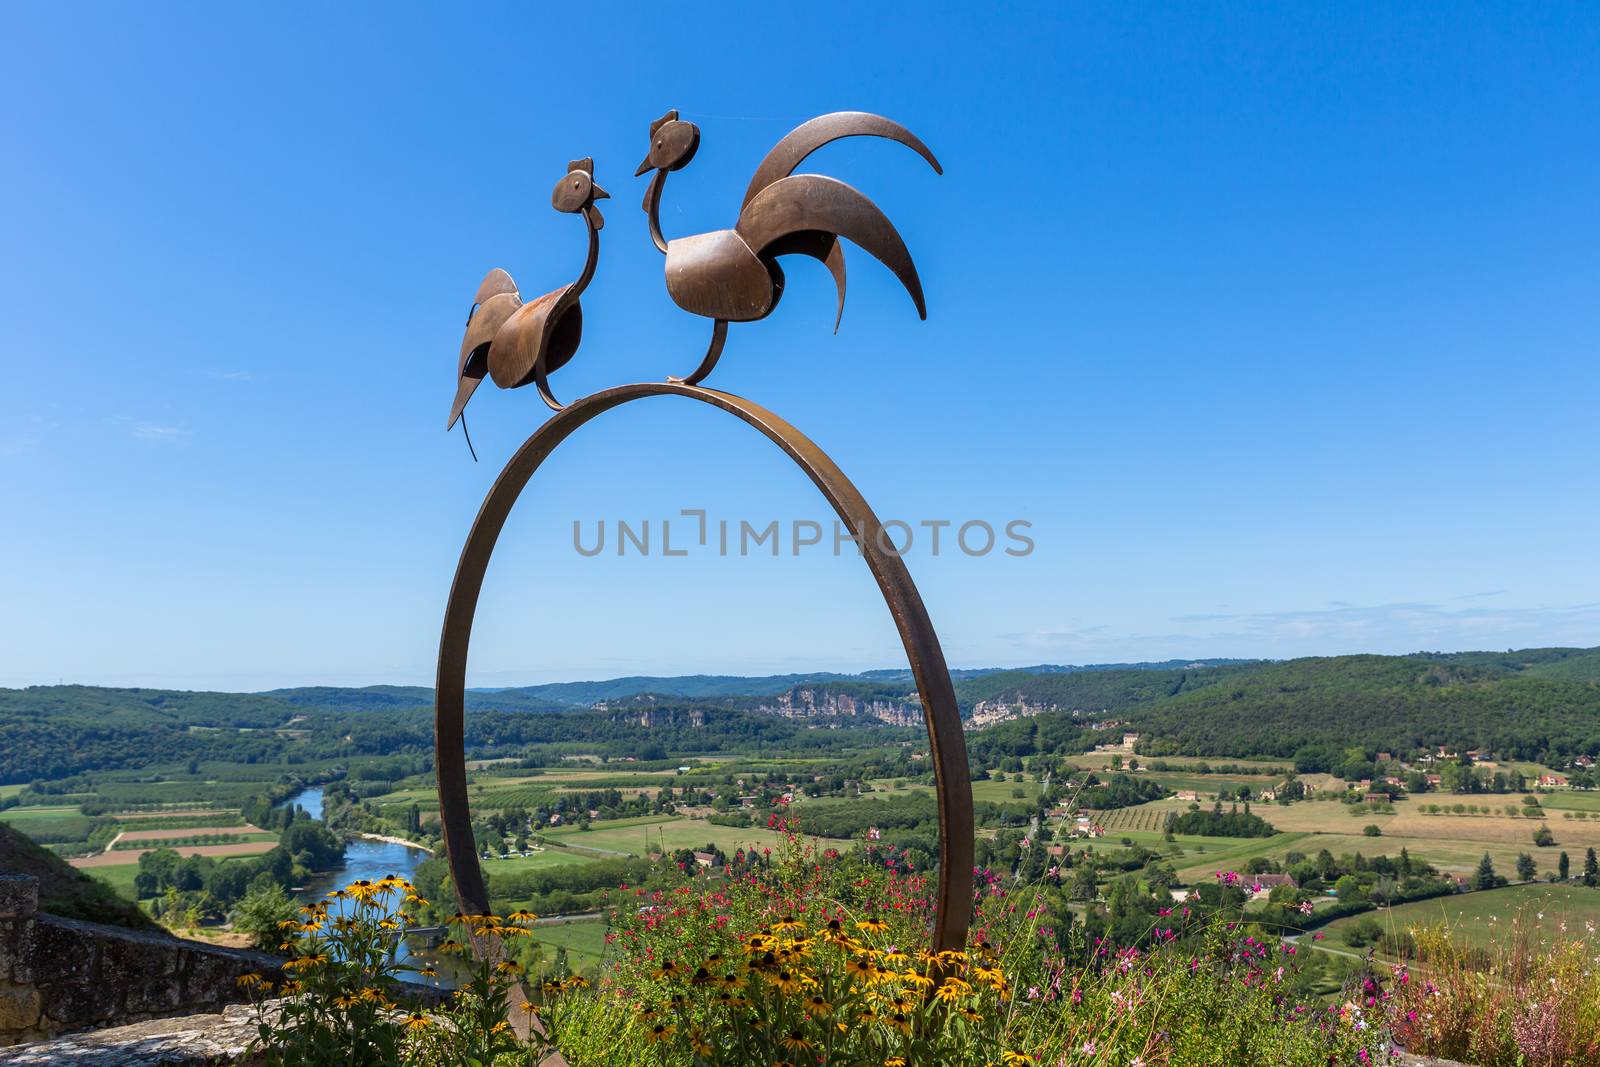 Domme, France - Symbolic roosters and view of the Dordogne Valley from the walls of the old town of Domme, Dordogne, France